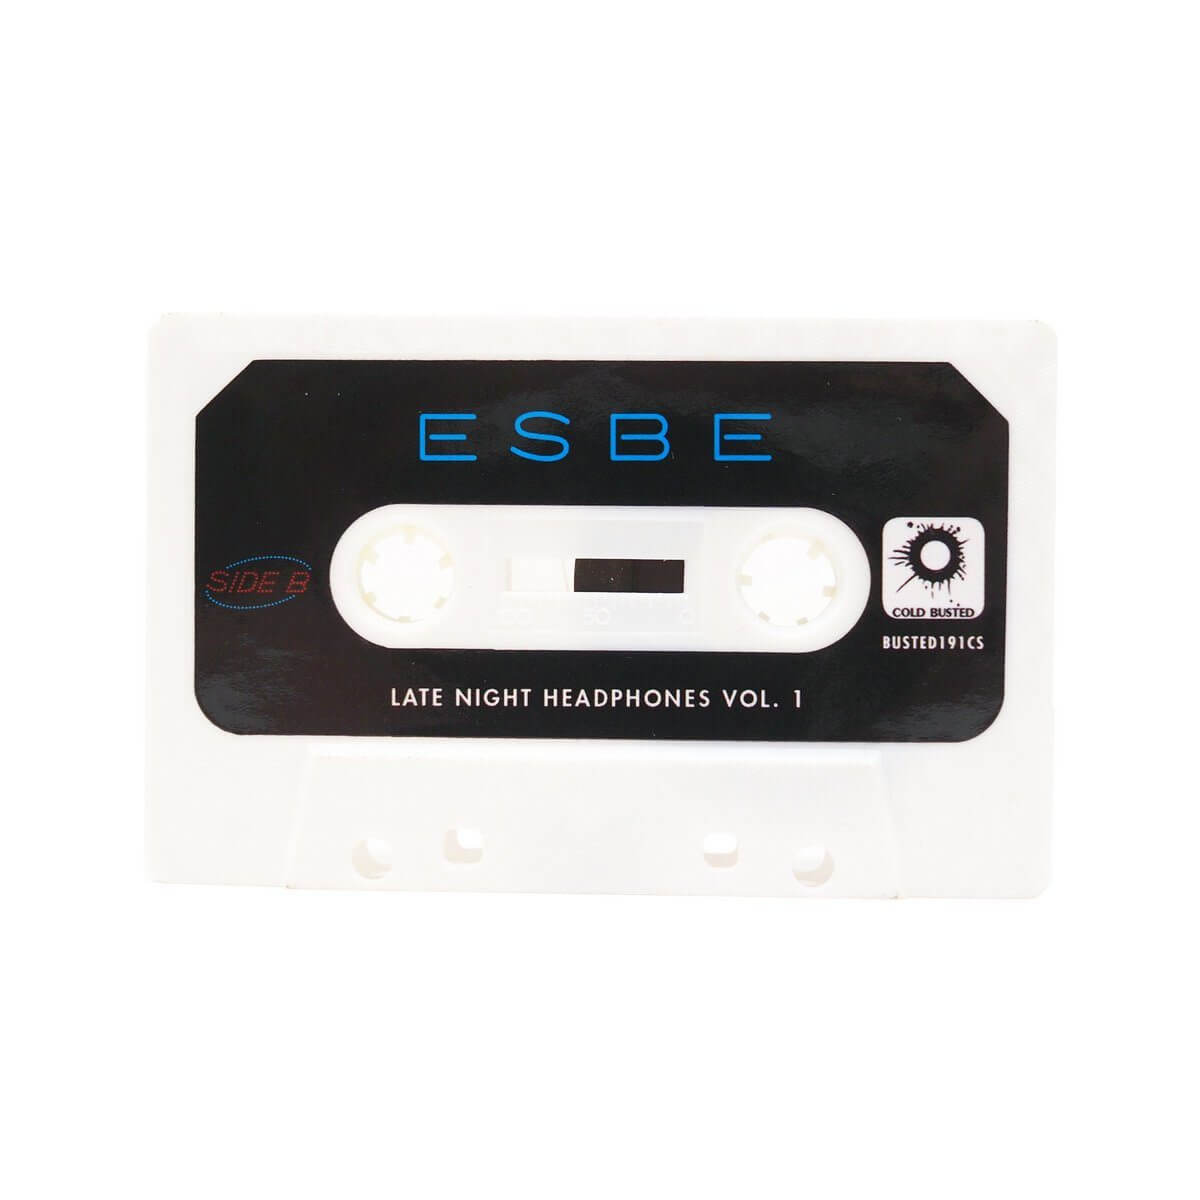 Esbe - Late Night Headphones Vol. 1 - Limited Edition Cassette - Cold Busted